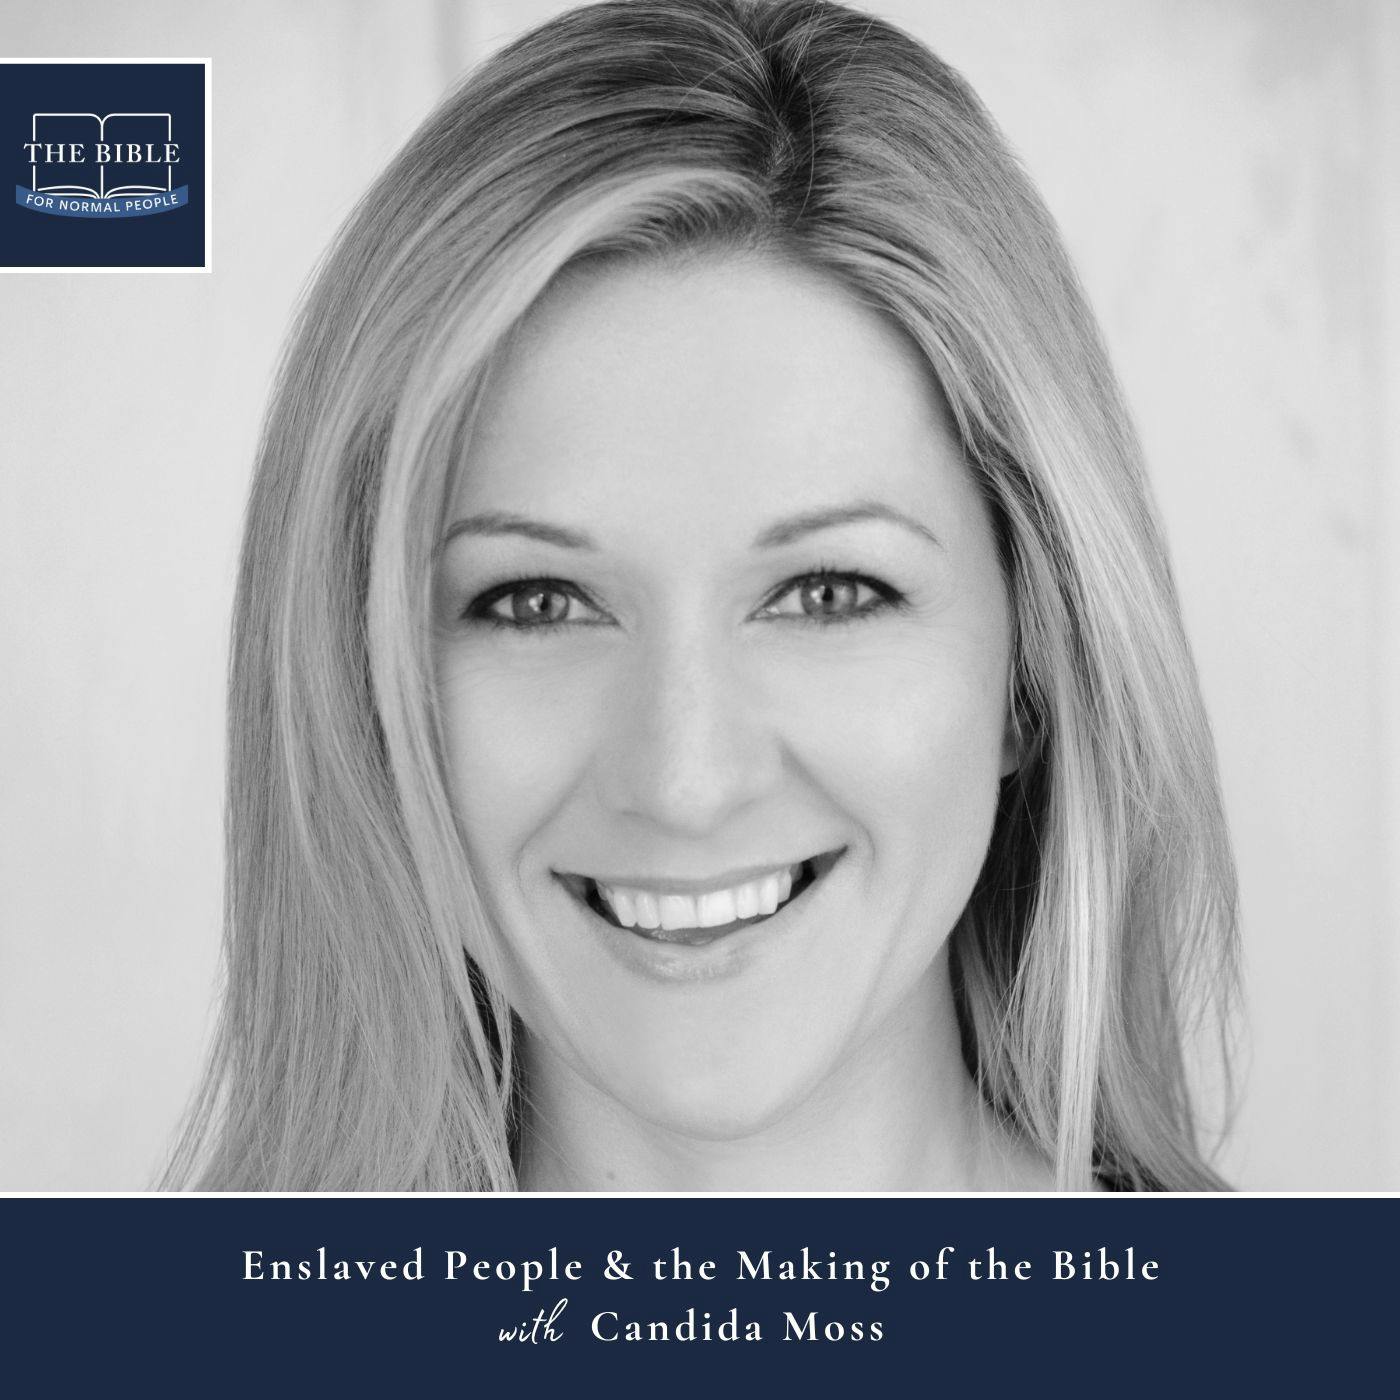 [Bible] Episode 266: Candida Moss - Enslaved People & the Making of the Bible